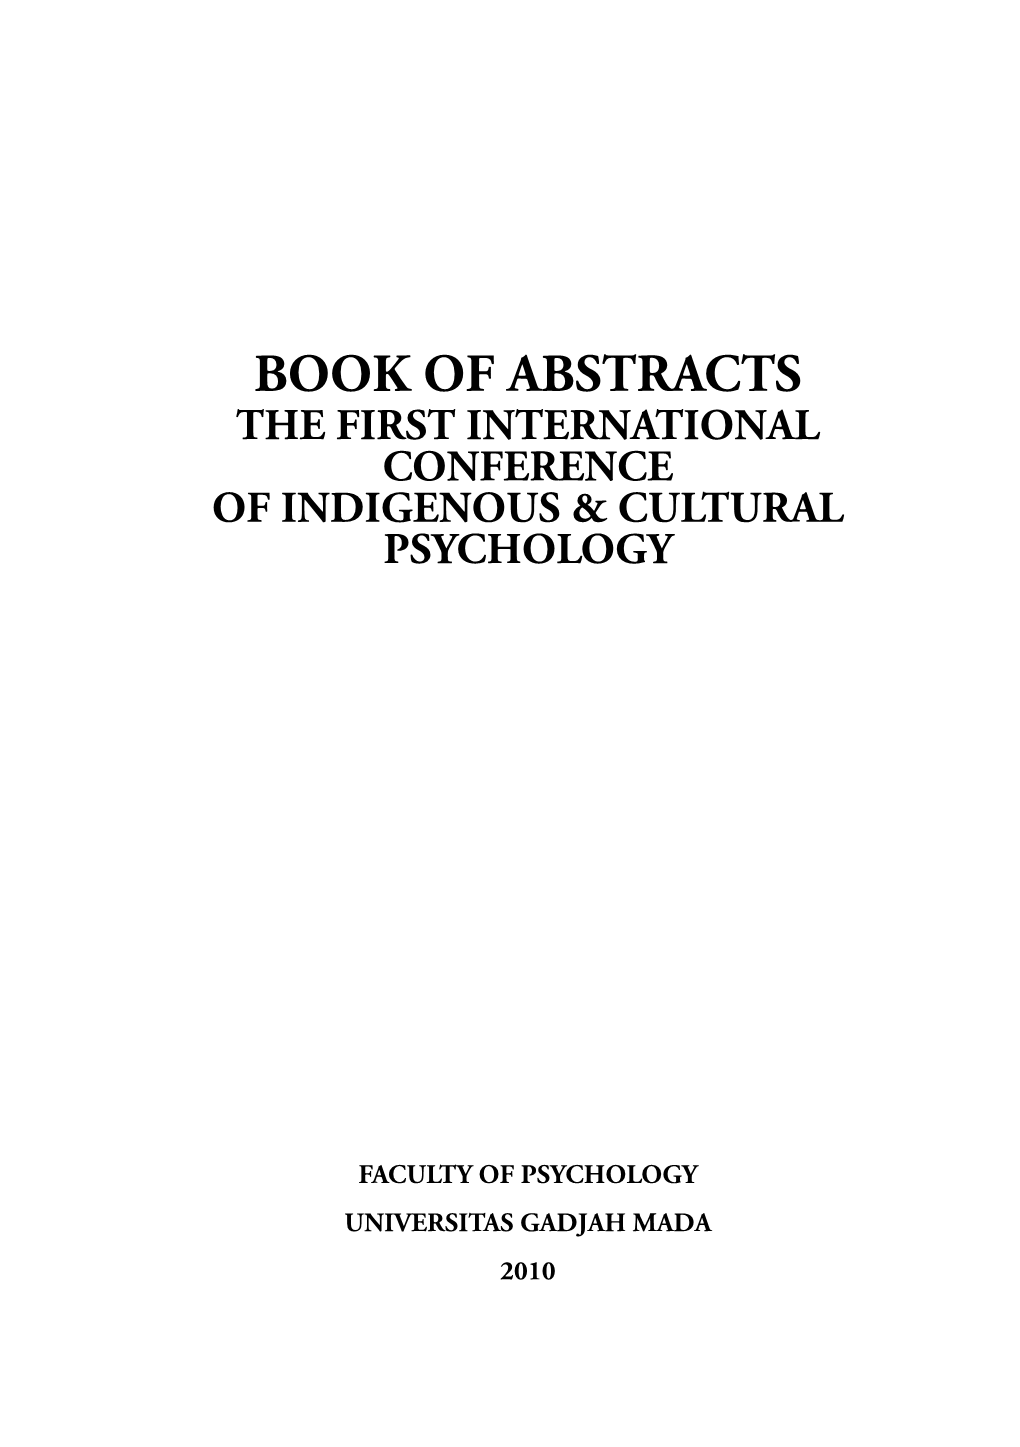 Book of Abstracts the First International Conference of Indigenous & Cultural Psychology